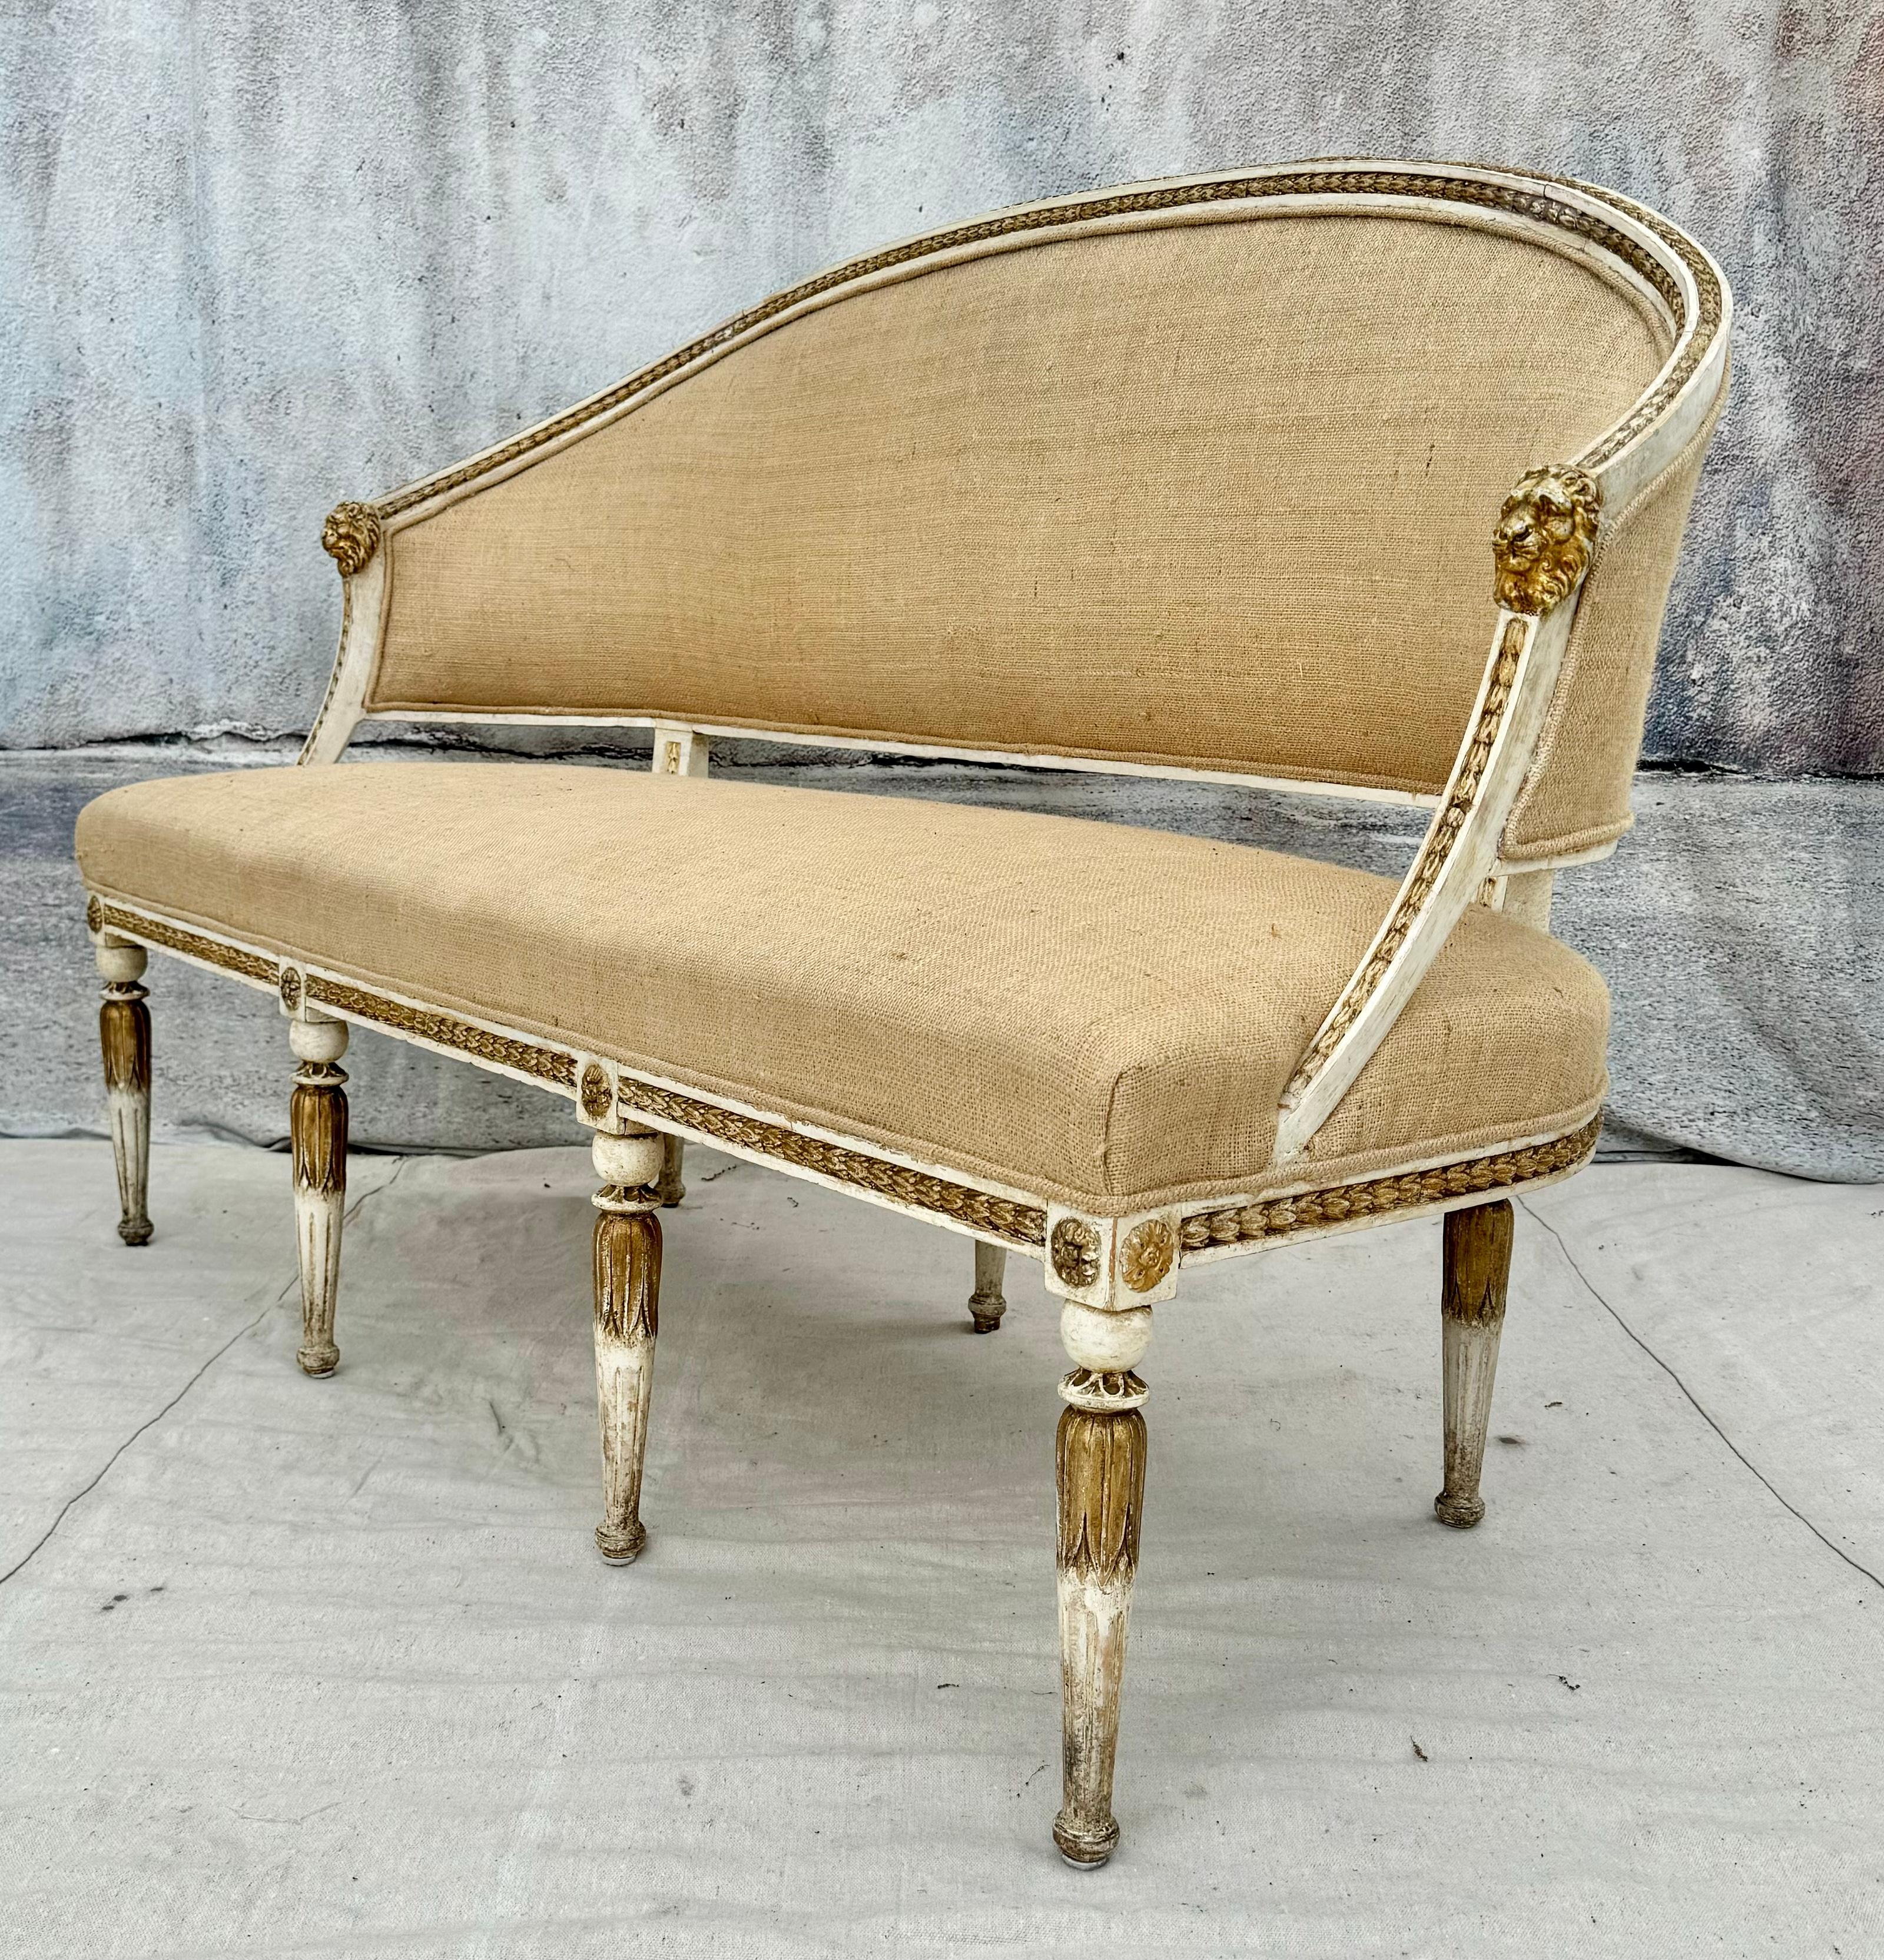 Beautiful cream painted Swedish neoclassical style giltwood upholstered settee. Settee has a curved back with gilt lion's head corners.  Features twisted rope gilt trim on arms and across back and across apron with gilt medallions atop each of the